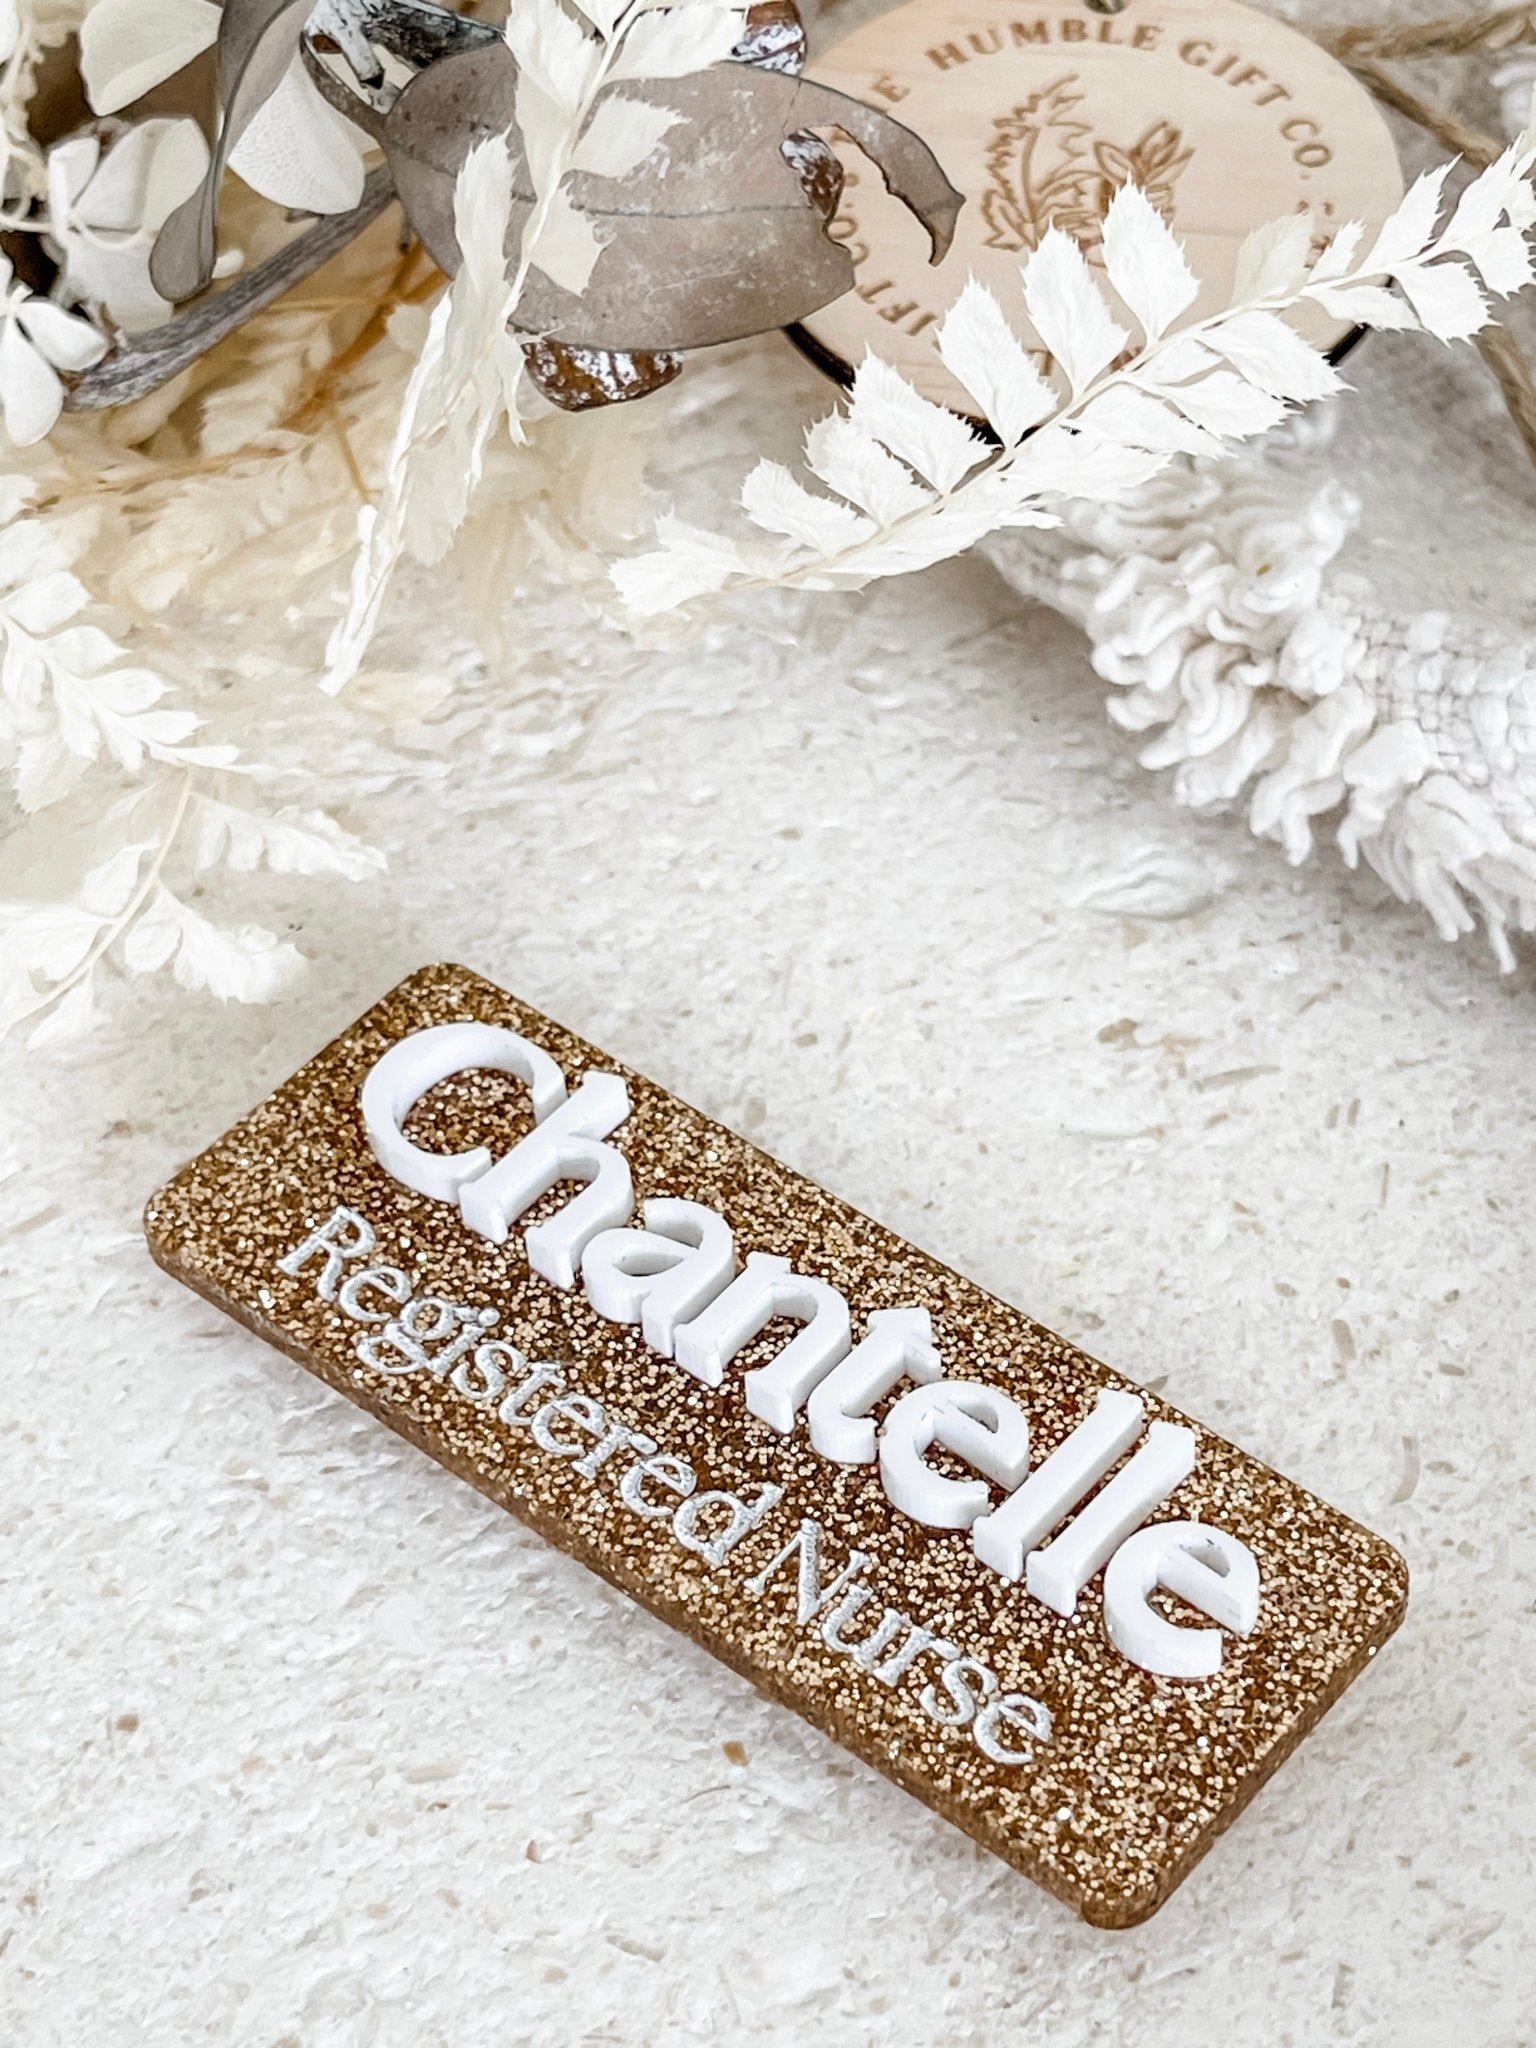 Name Badge with Occupation - Glitter Acrylic - The Humble Gift Co.